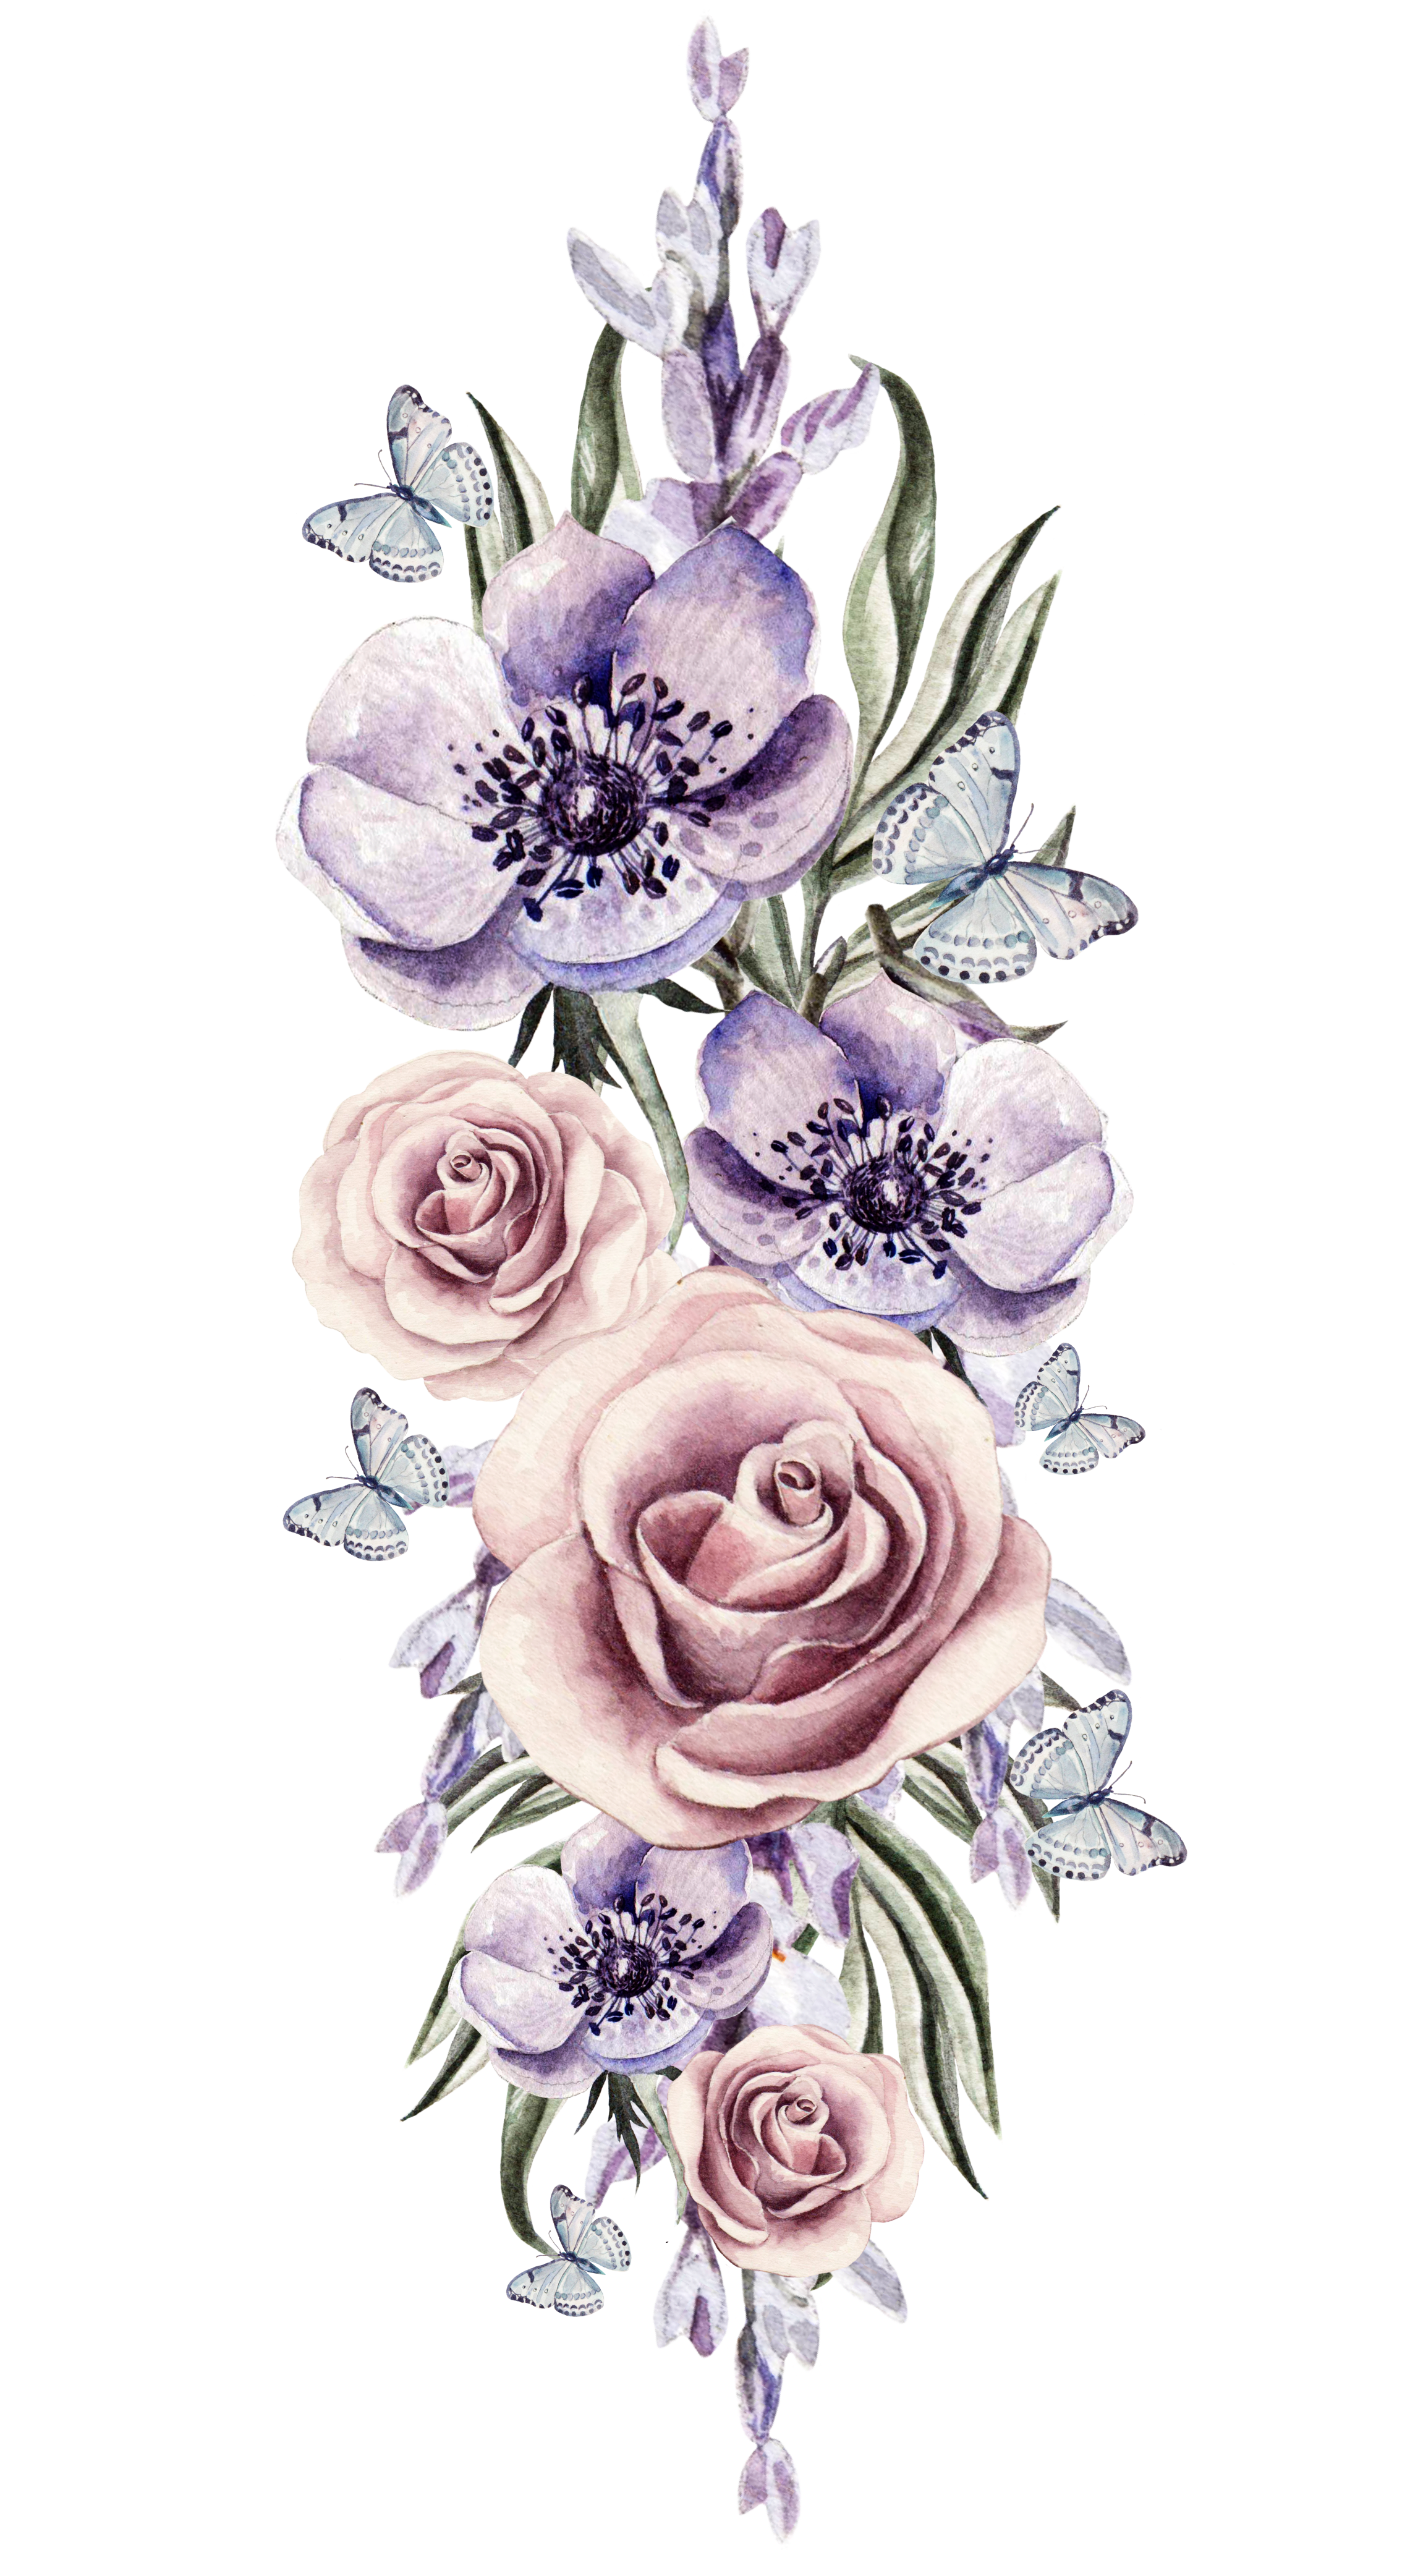 Watercolor Flowers Png, Vector, PSD, and Clipart With